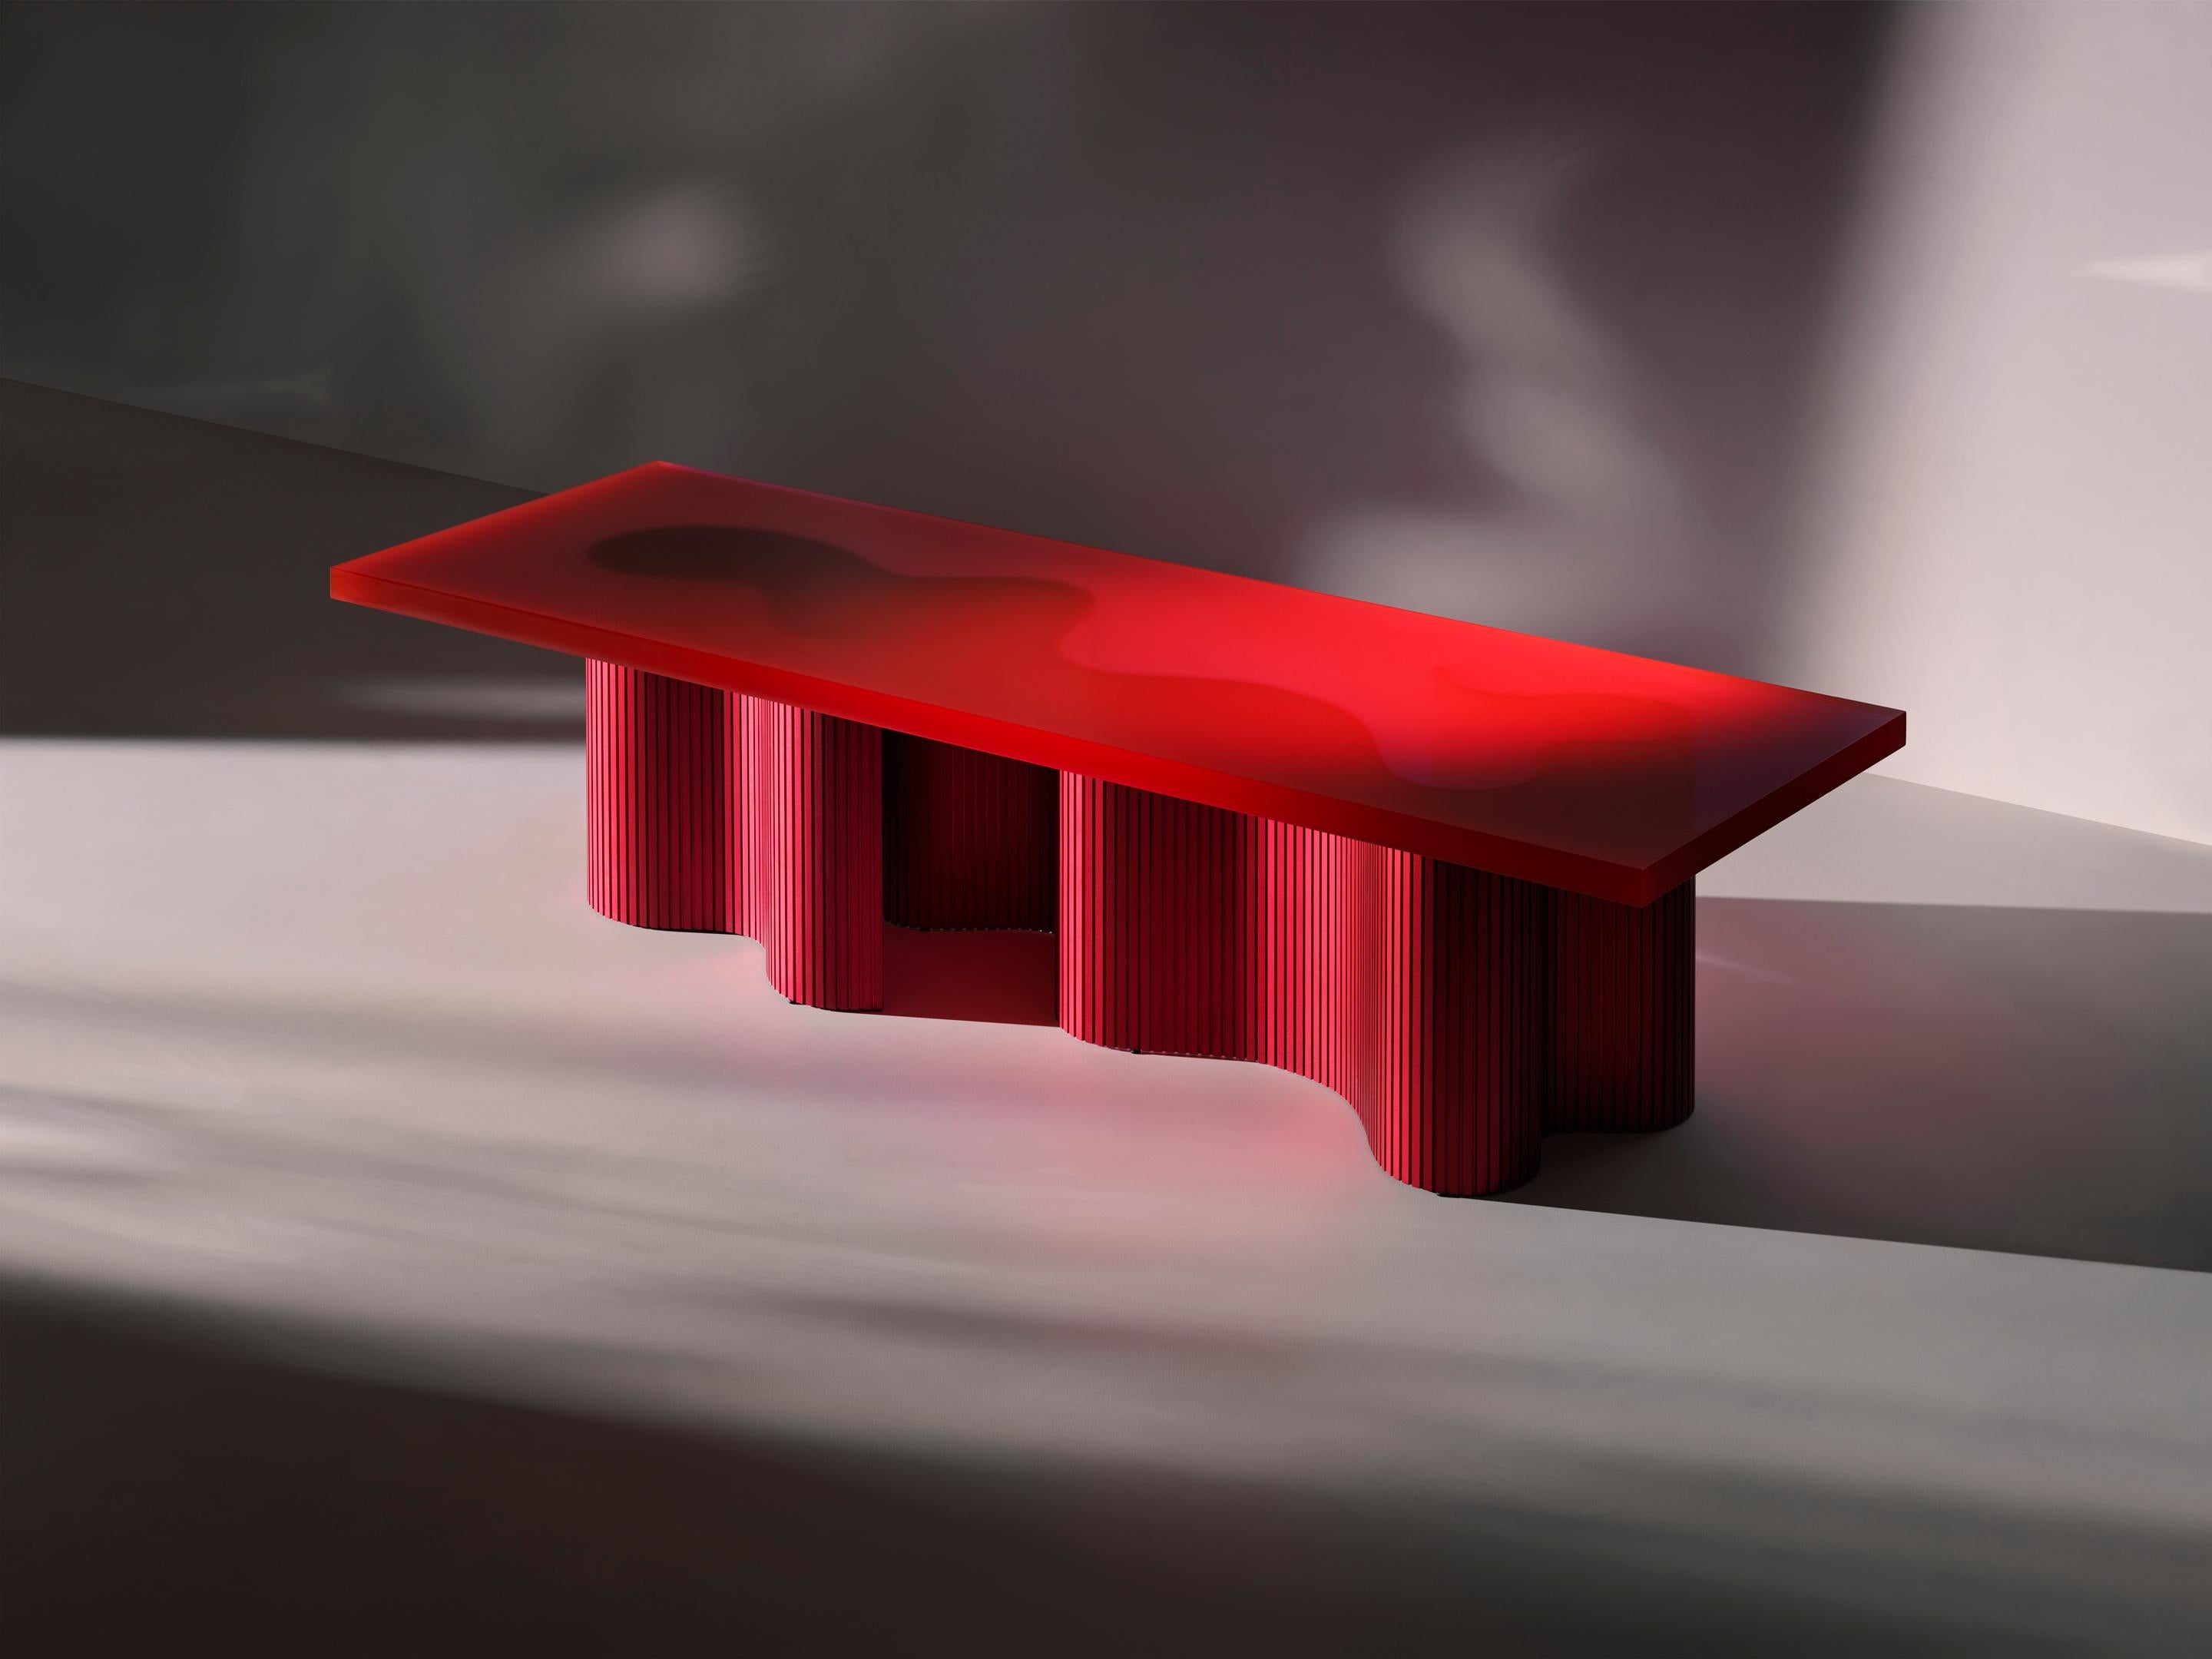 Anodized Contemporary Resin Coffee Table, Red Polished Spine Table, by Erik Olovsson For Sale